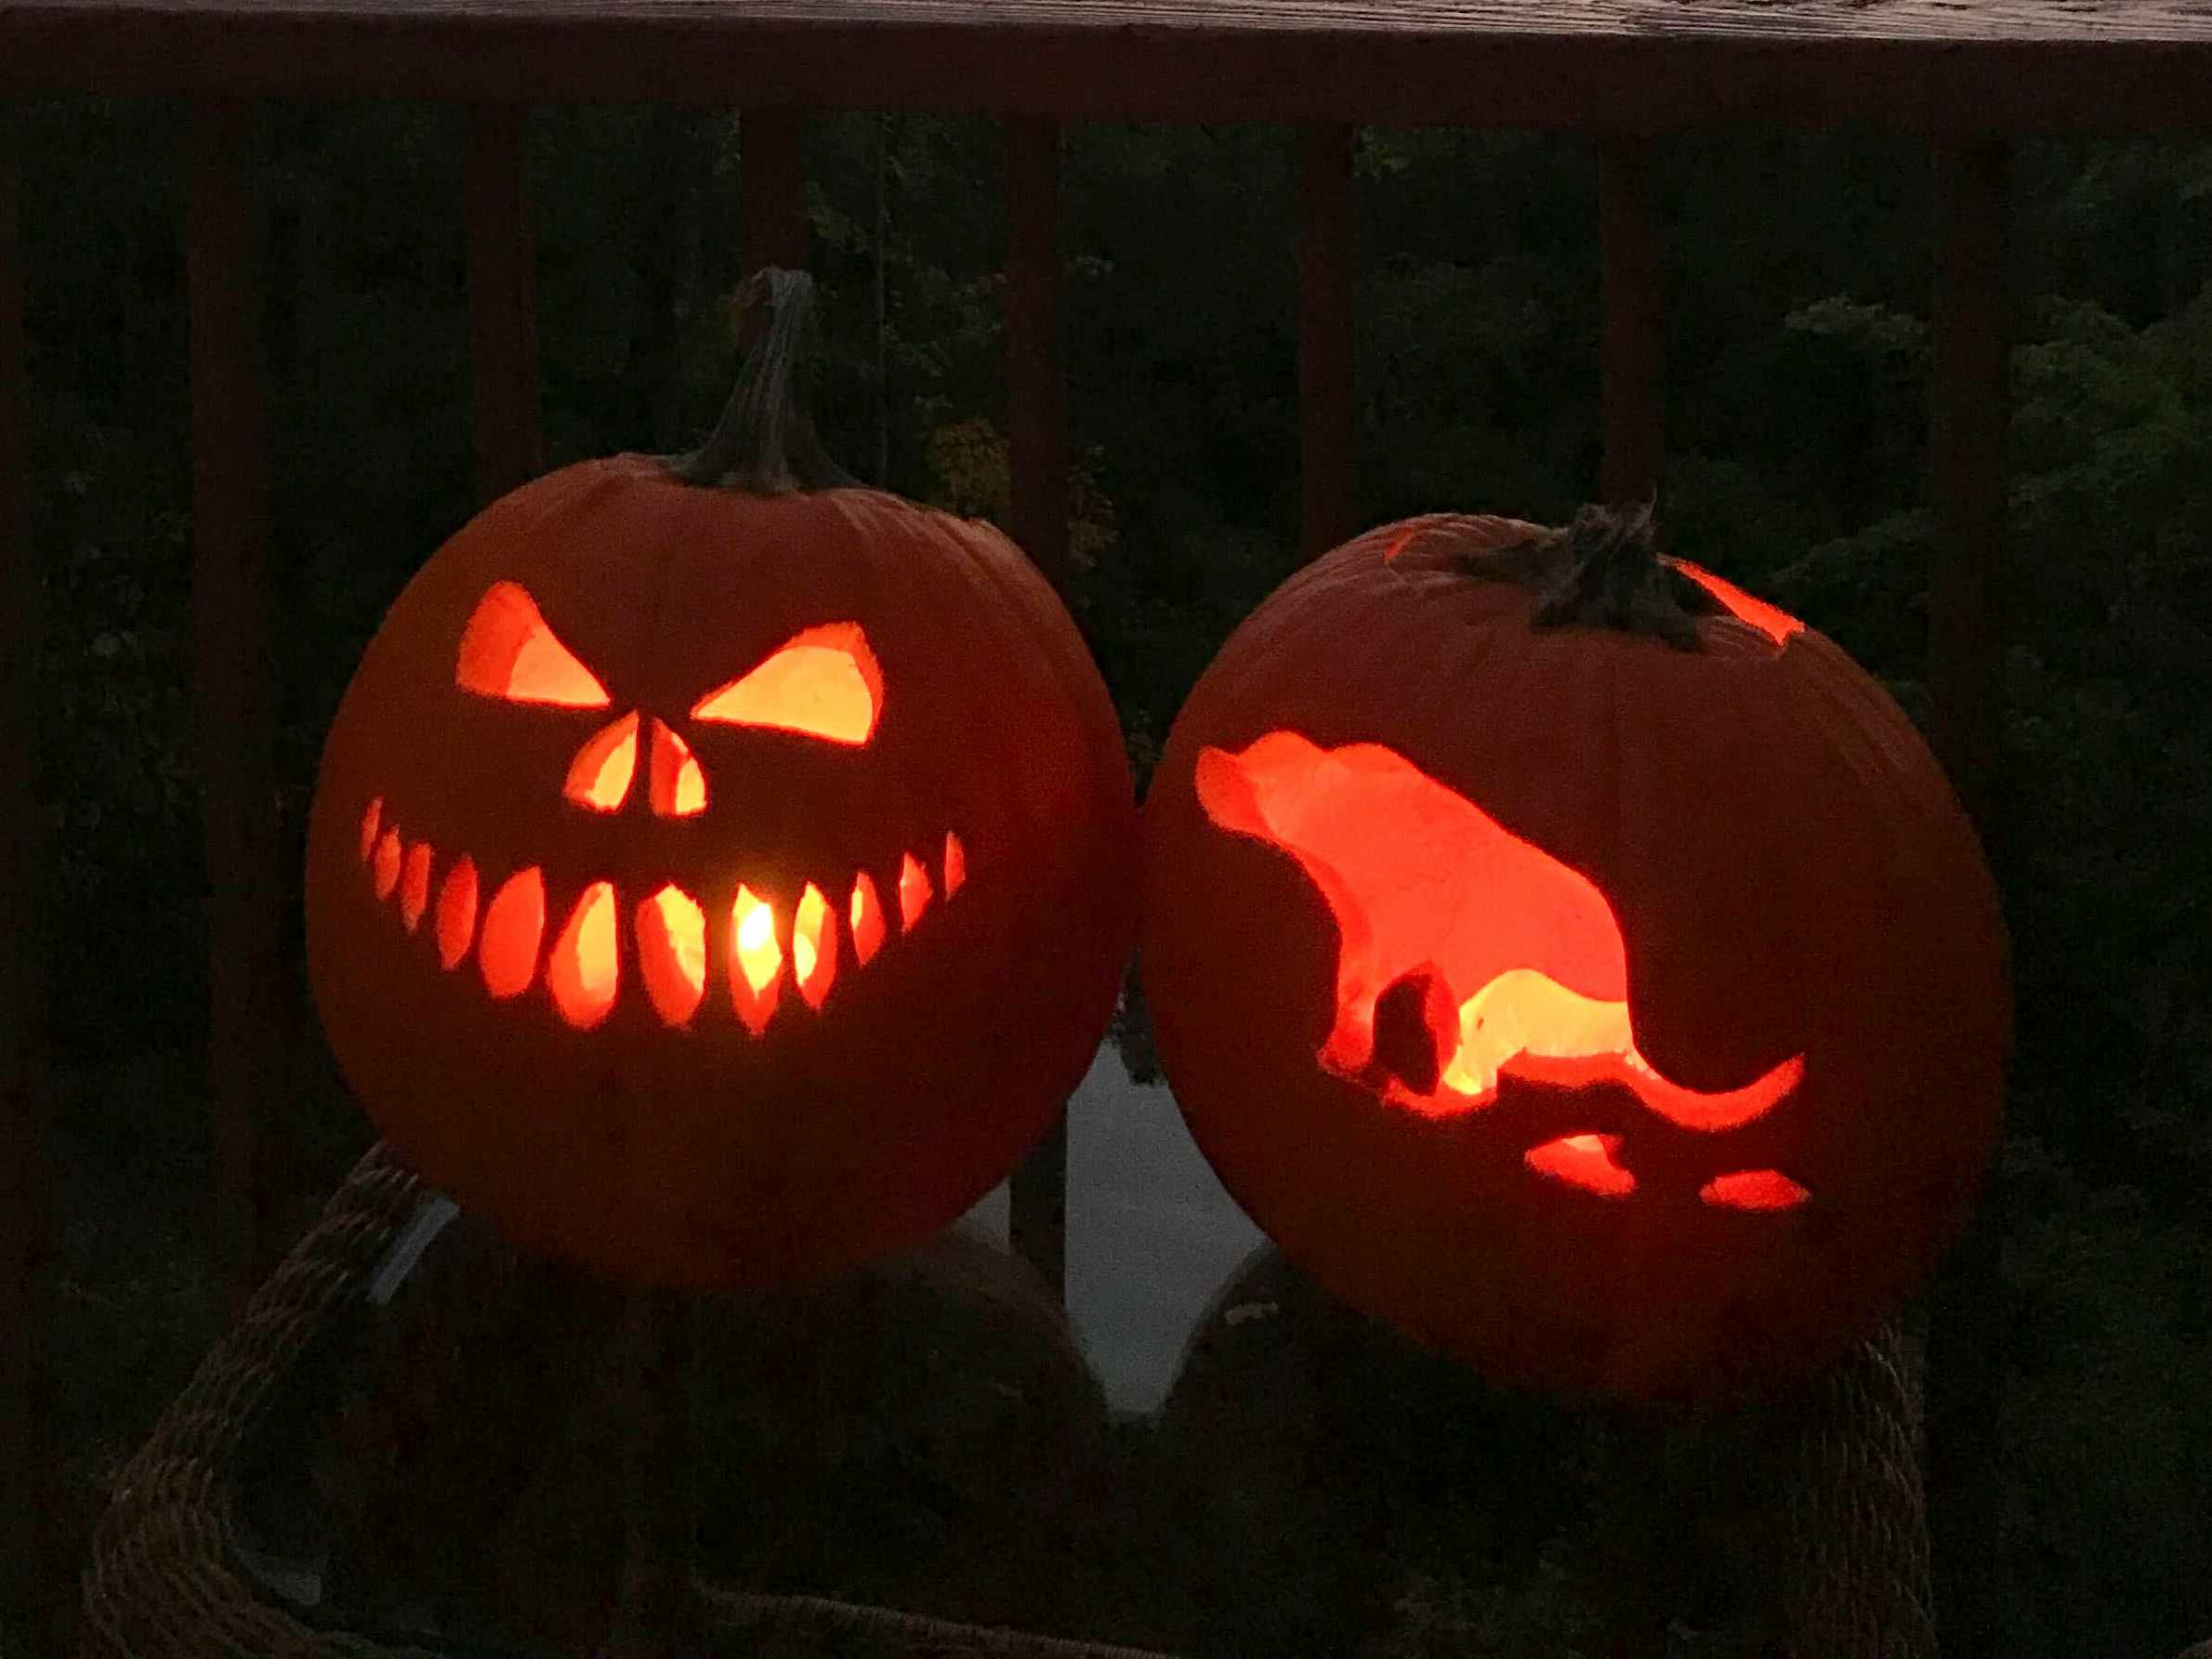 Two carved pumpkins, one with a scary face, the other with a dog pooping carved into it.